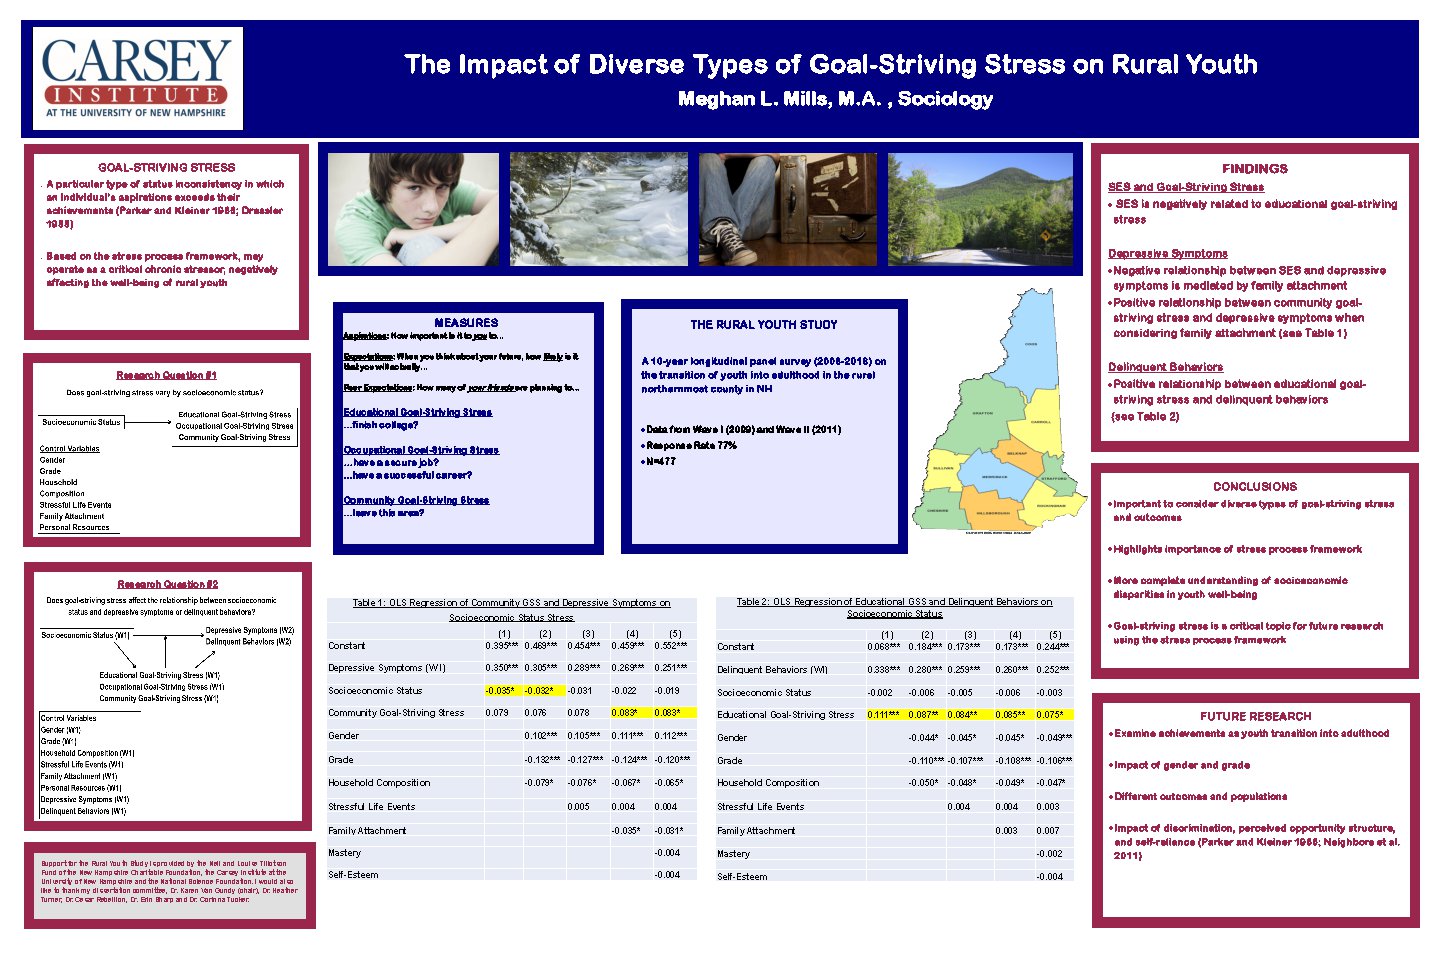 The Impact Of Diverse Types Of Goal-Striving Stress On Rural Youth by mlz55